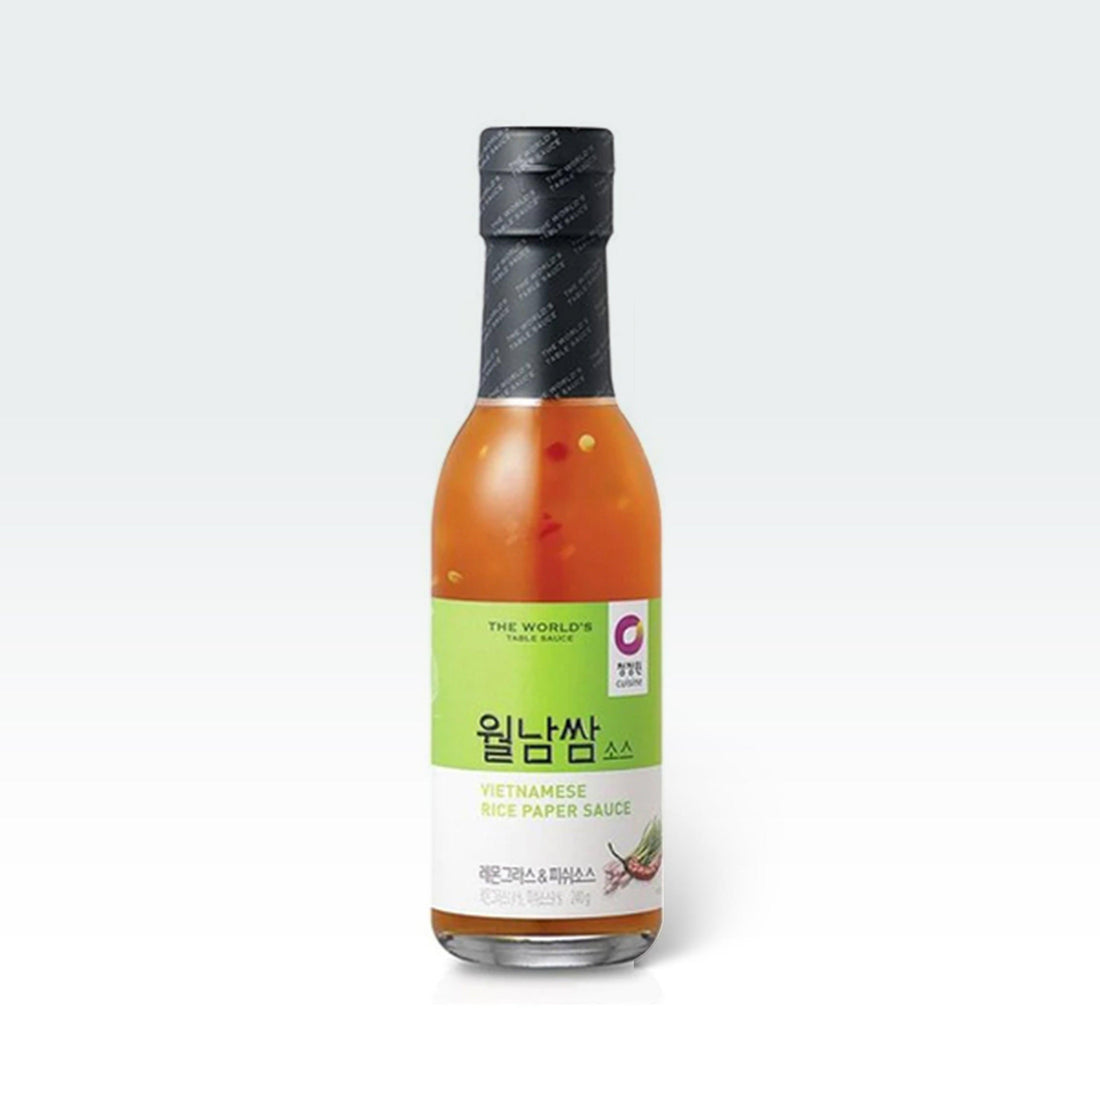 Chungjungwon Vietnam Rice Paper Sauce - Anytime Basket